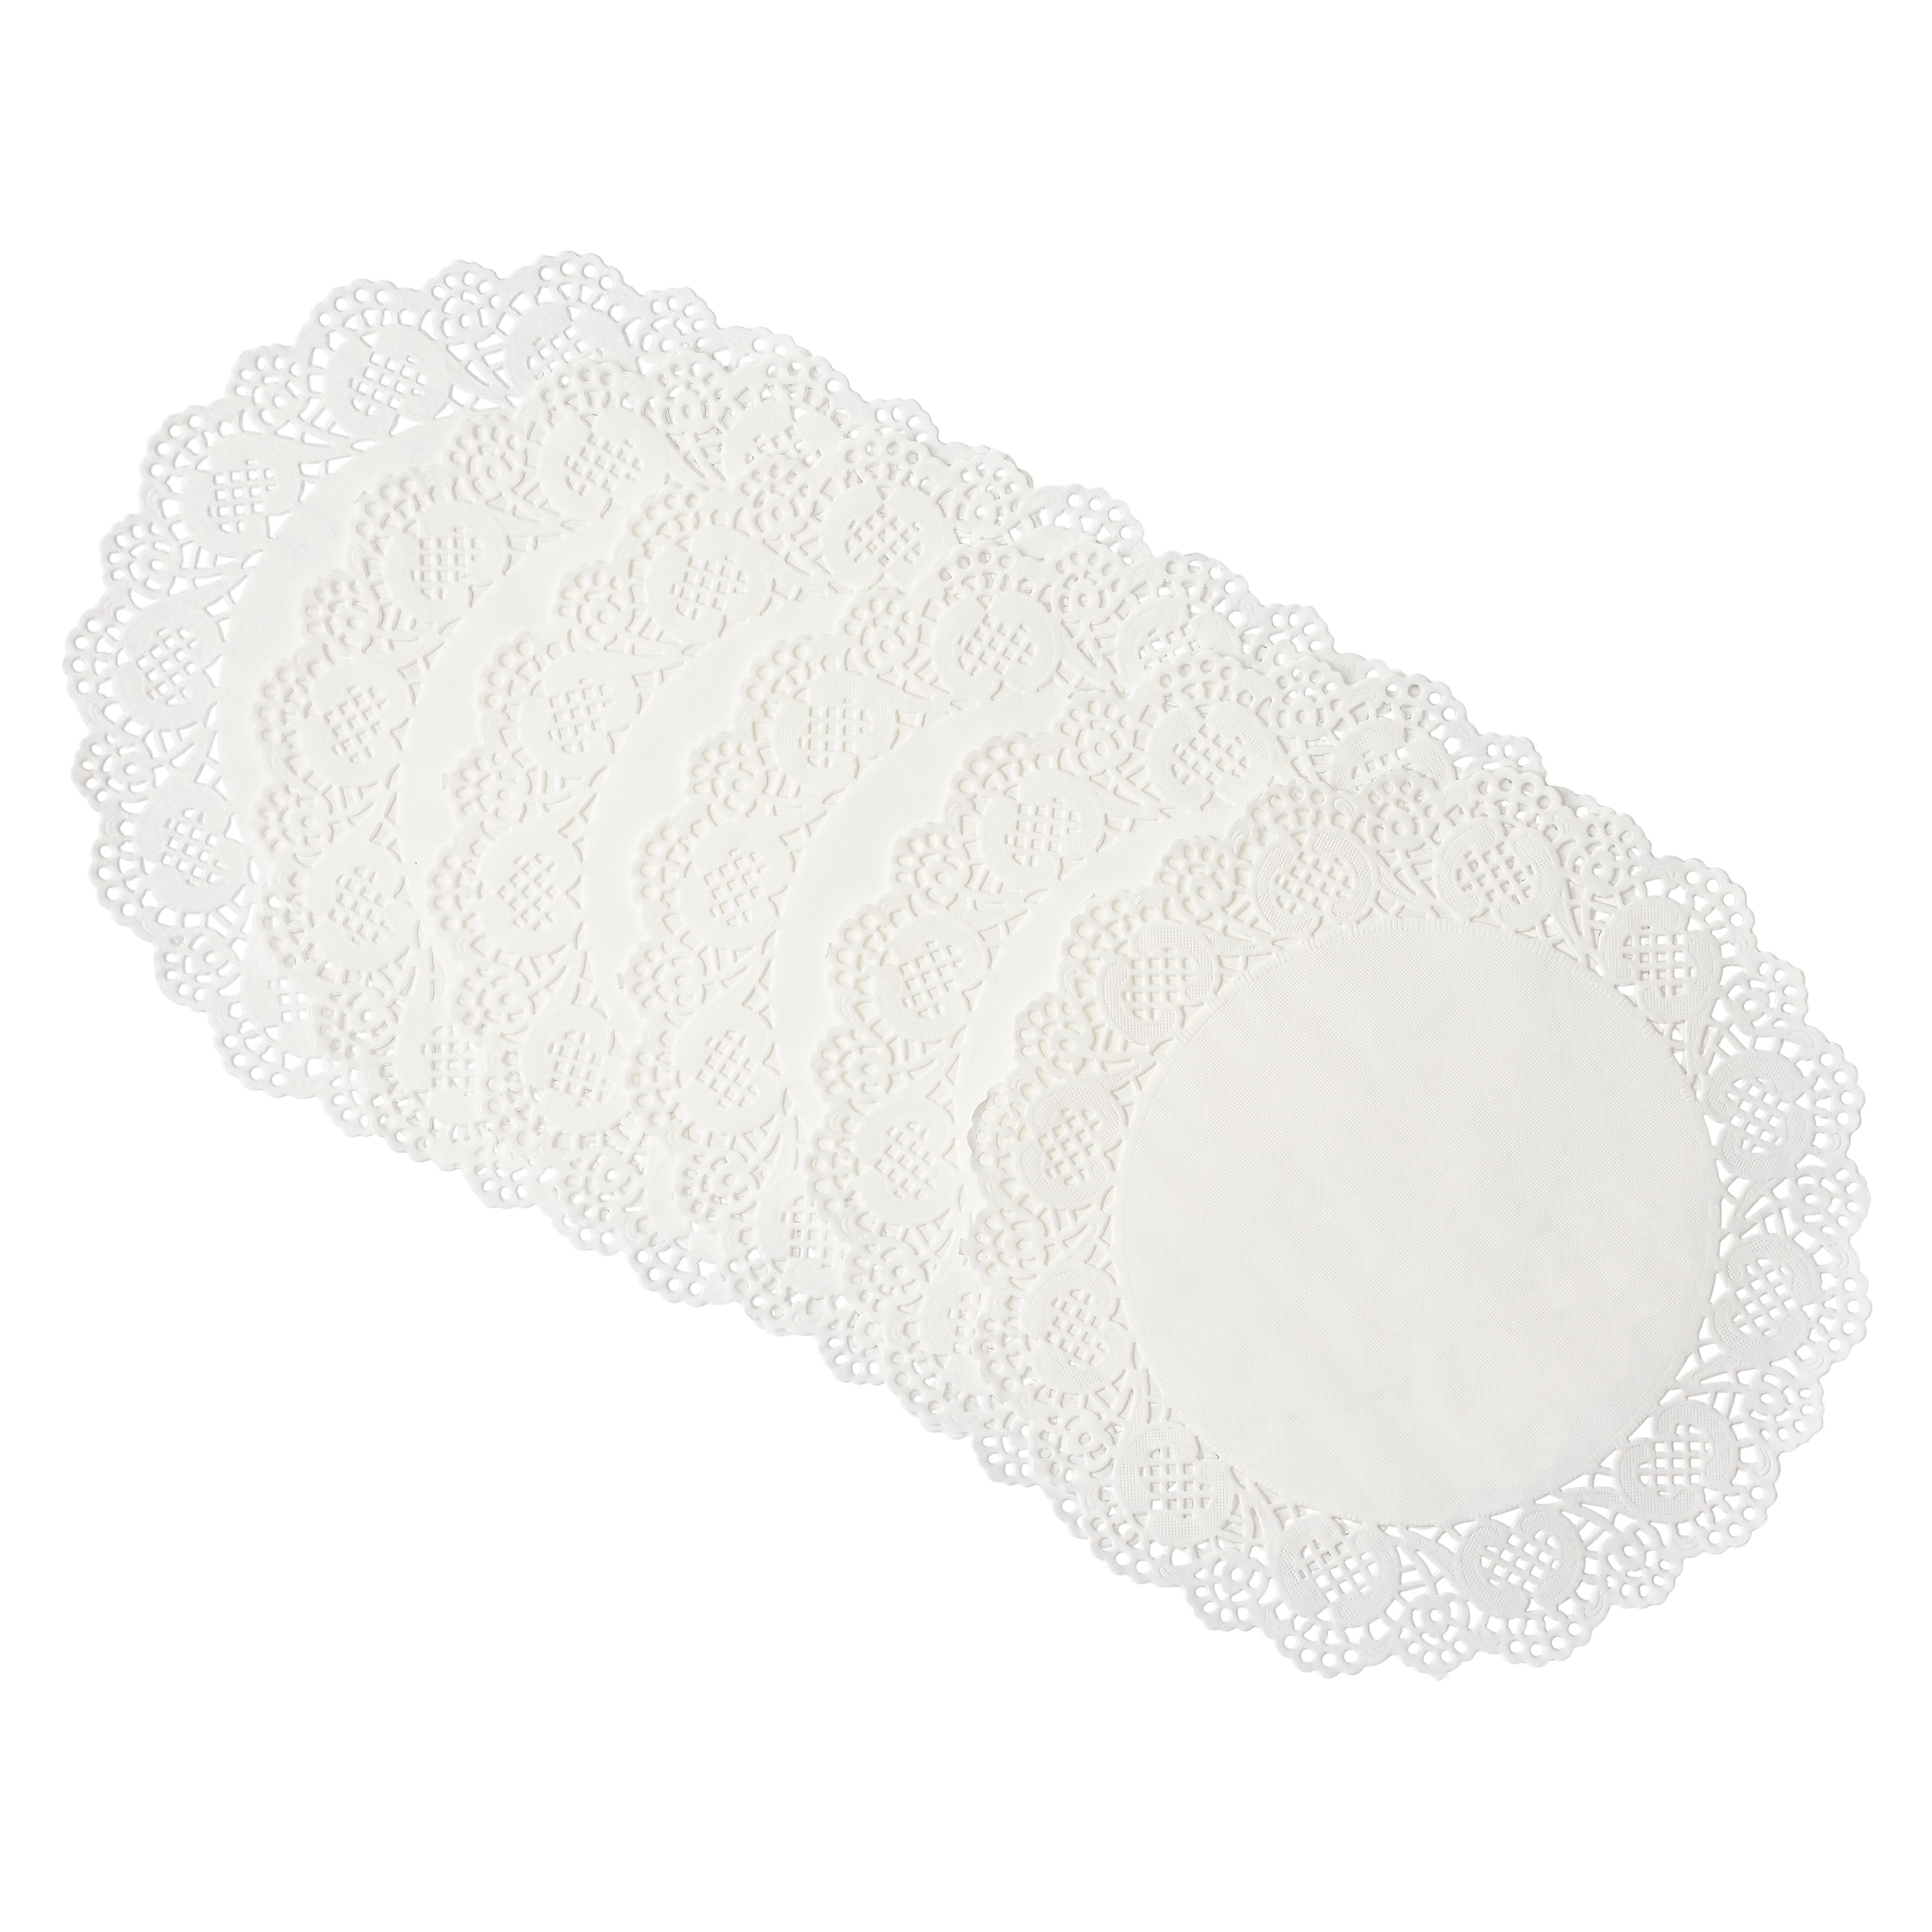 10 Paper Doilies by Celebrate It®